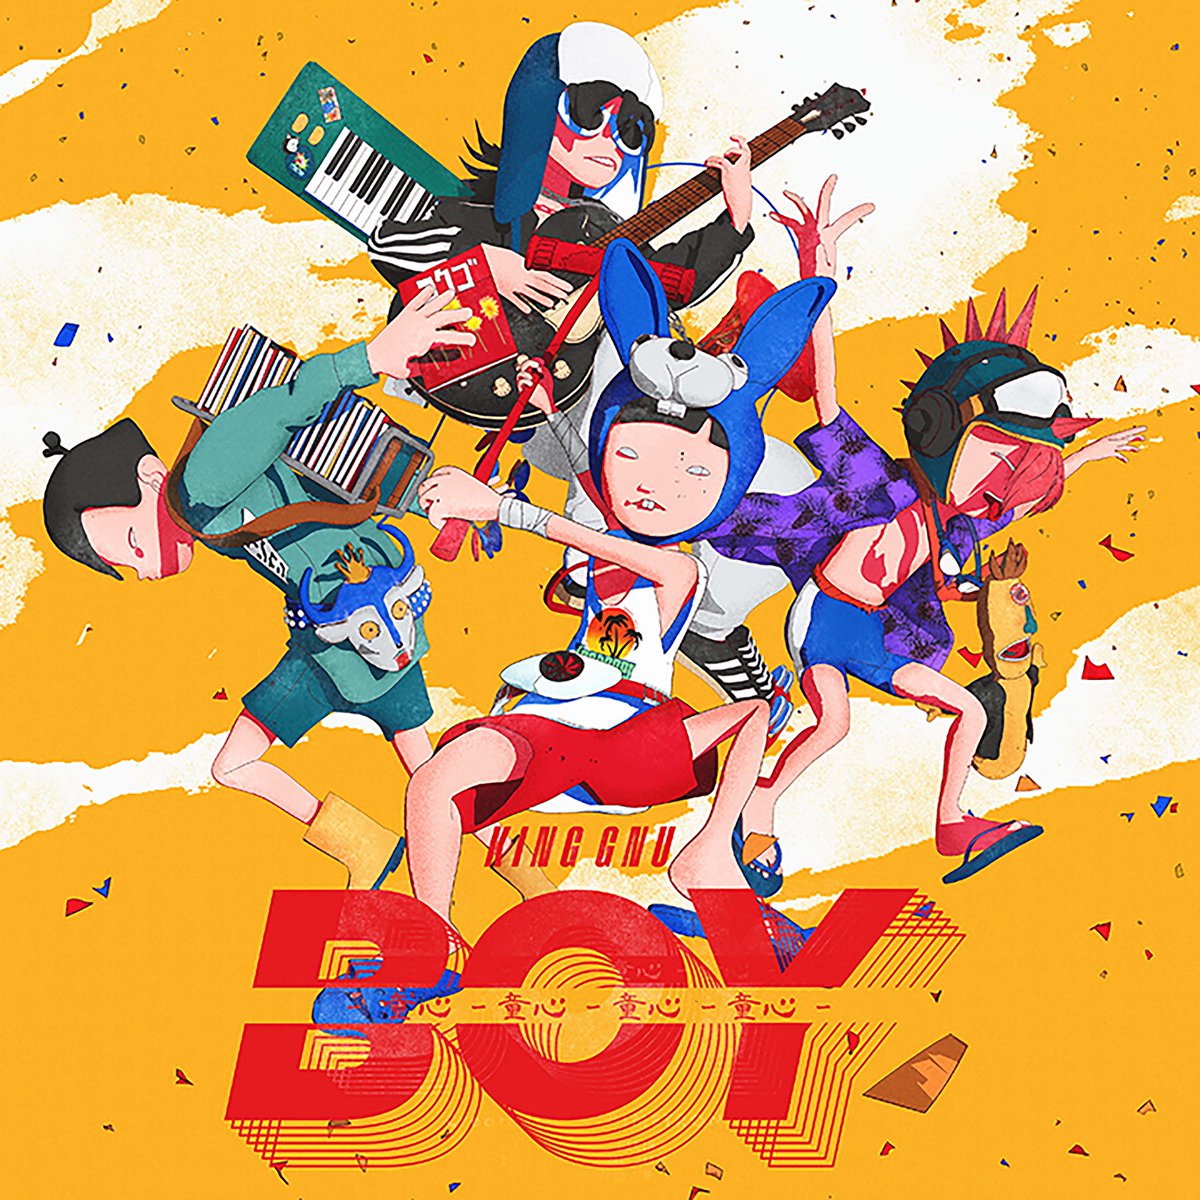 Cover for『King Gnu - BOY』from the release『BOY』